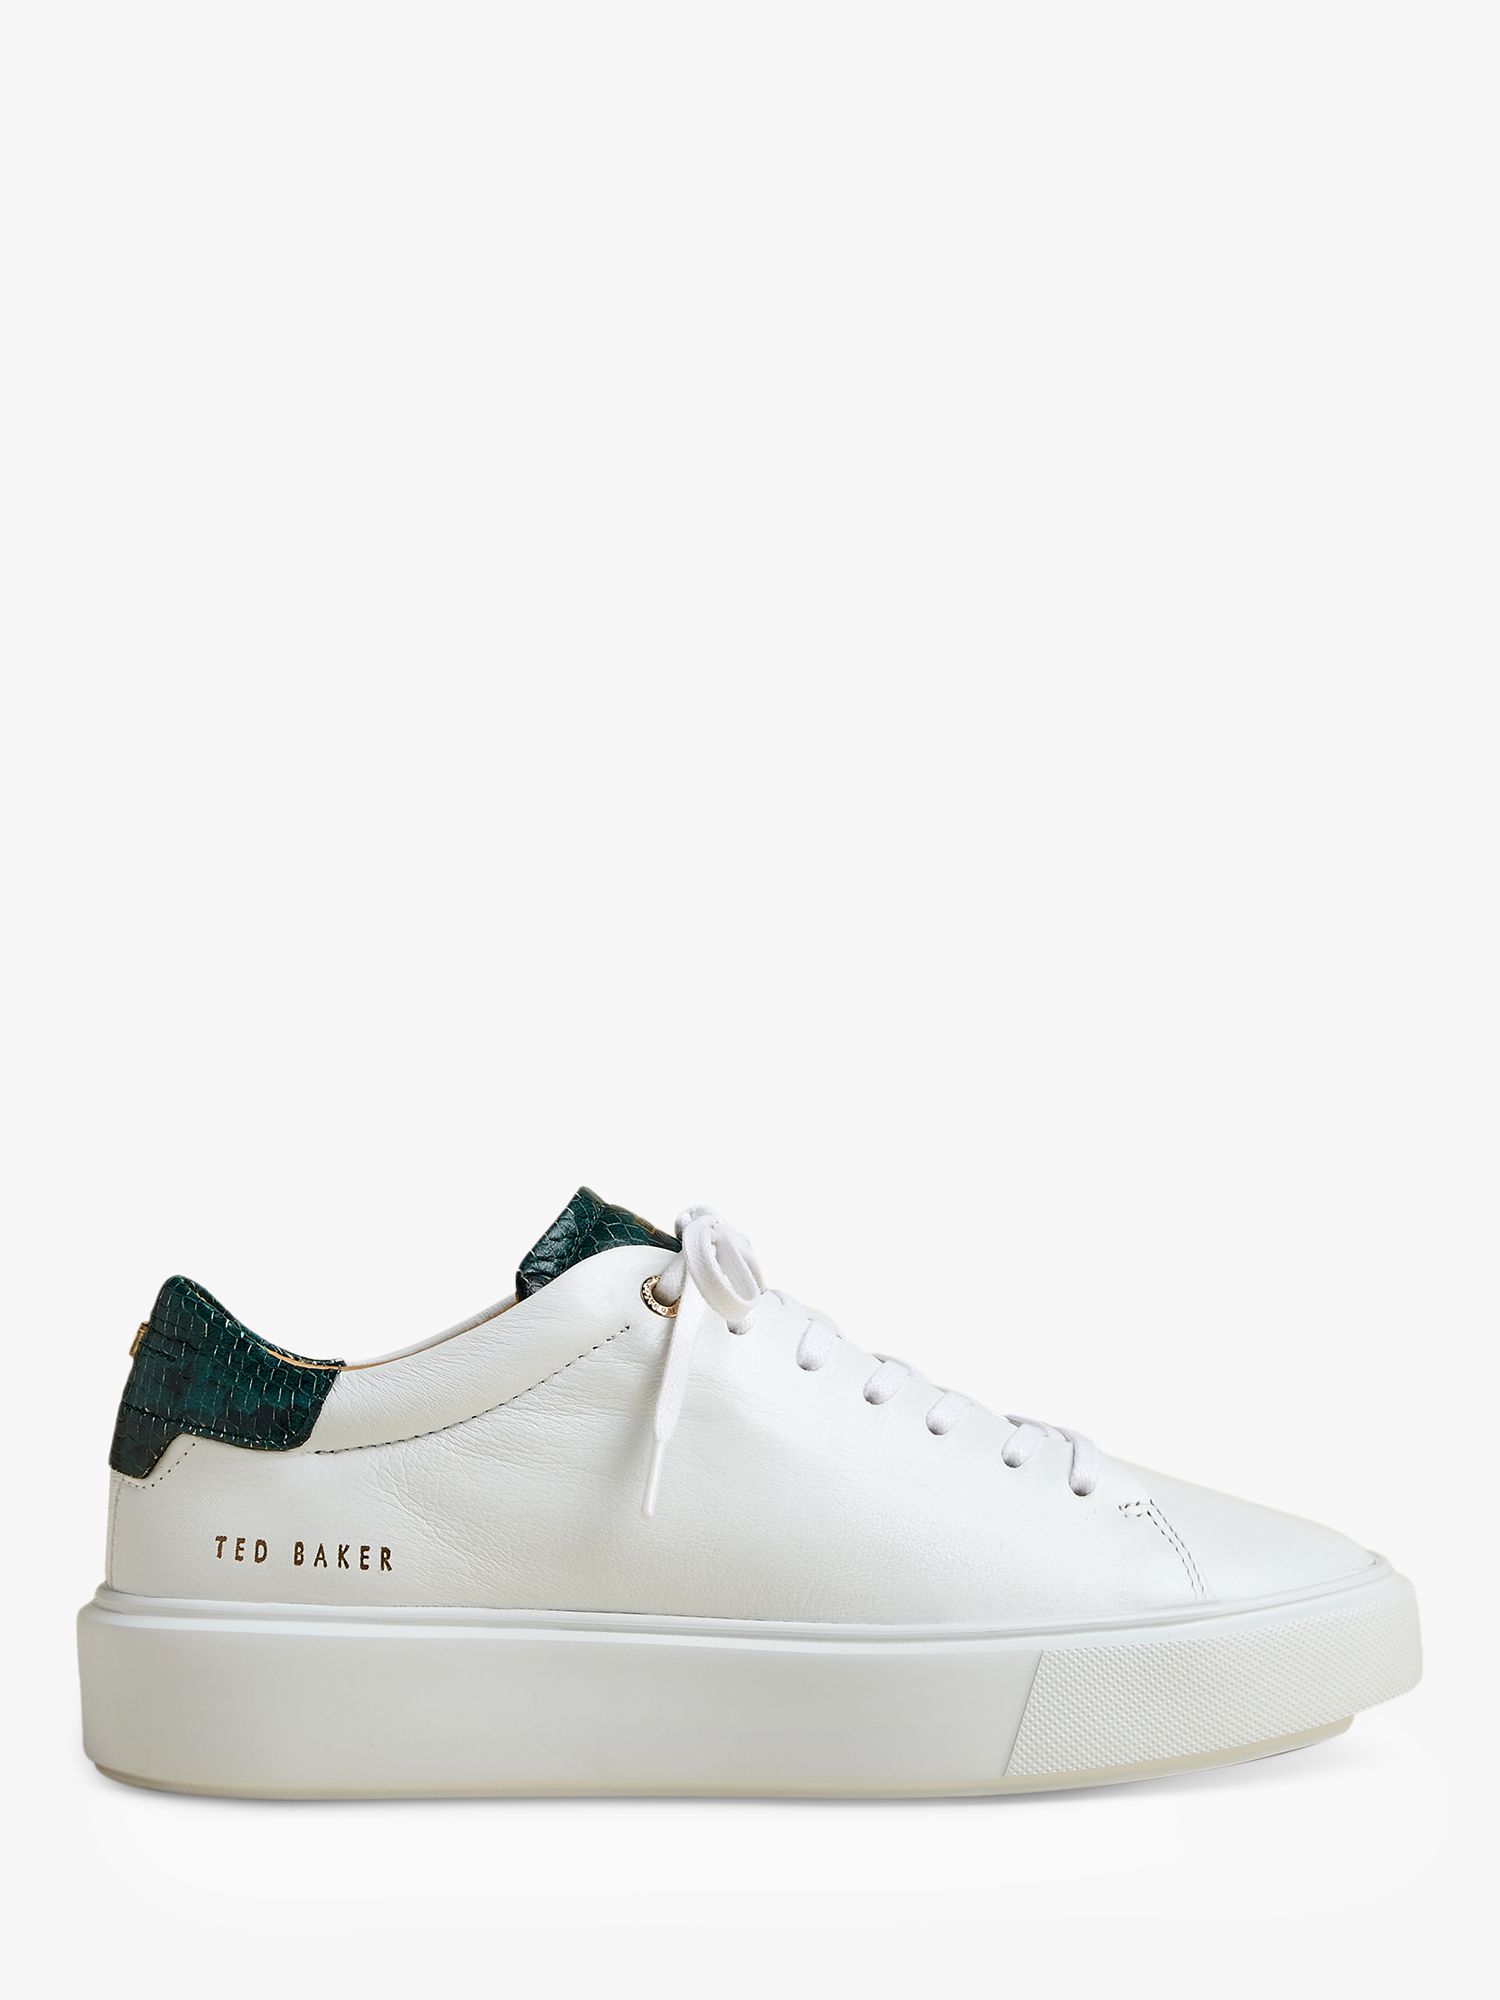 Ted Baker Piixie Leather Lace Up Trainers, White, 3